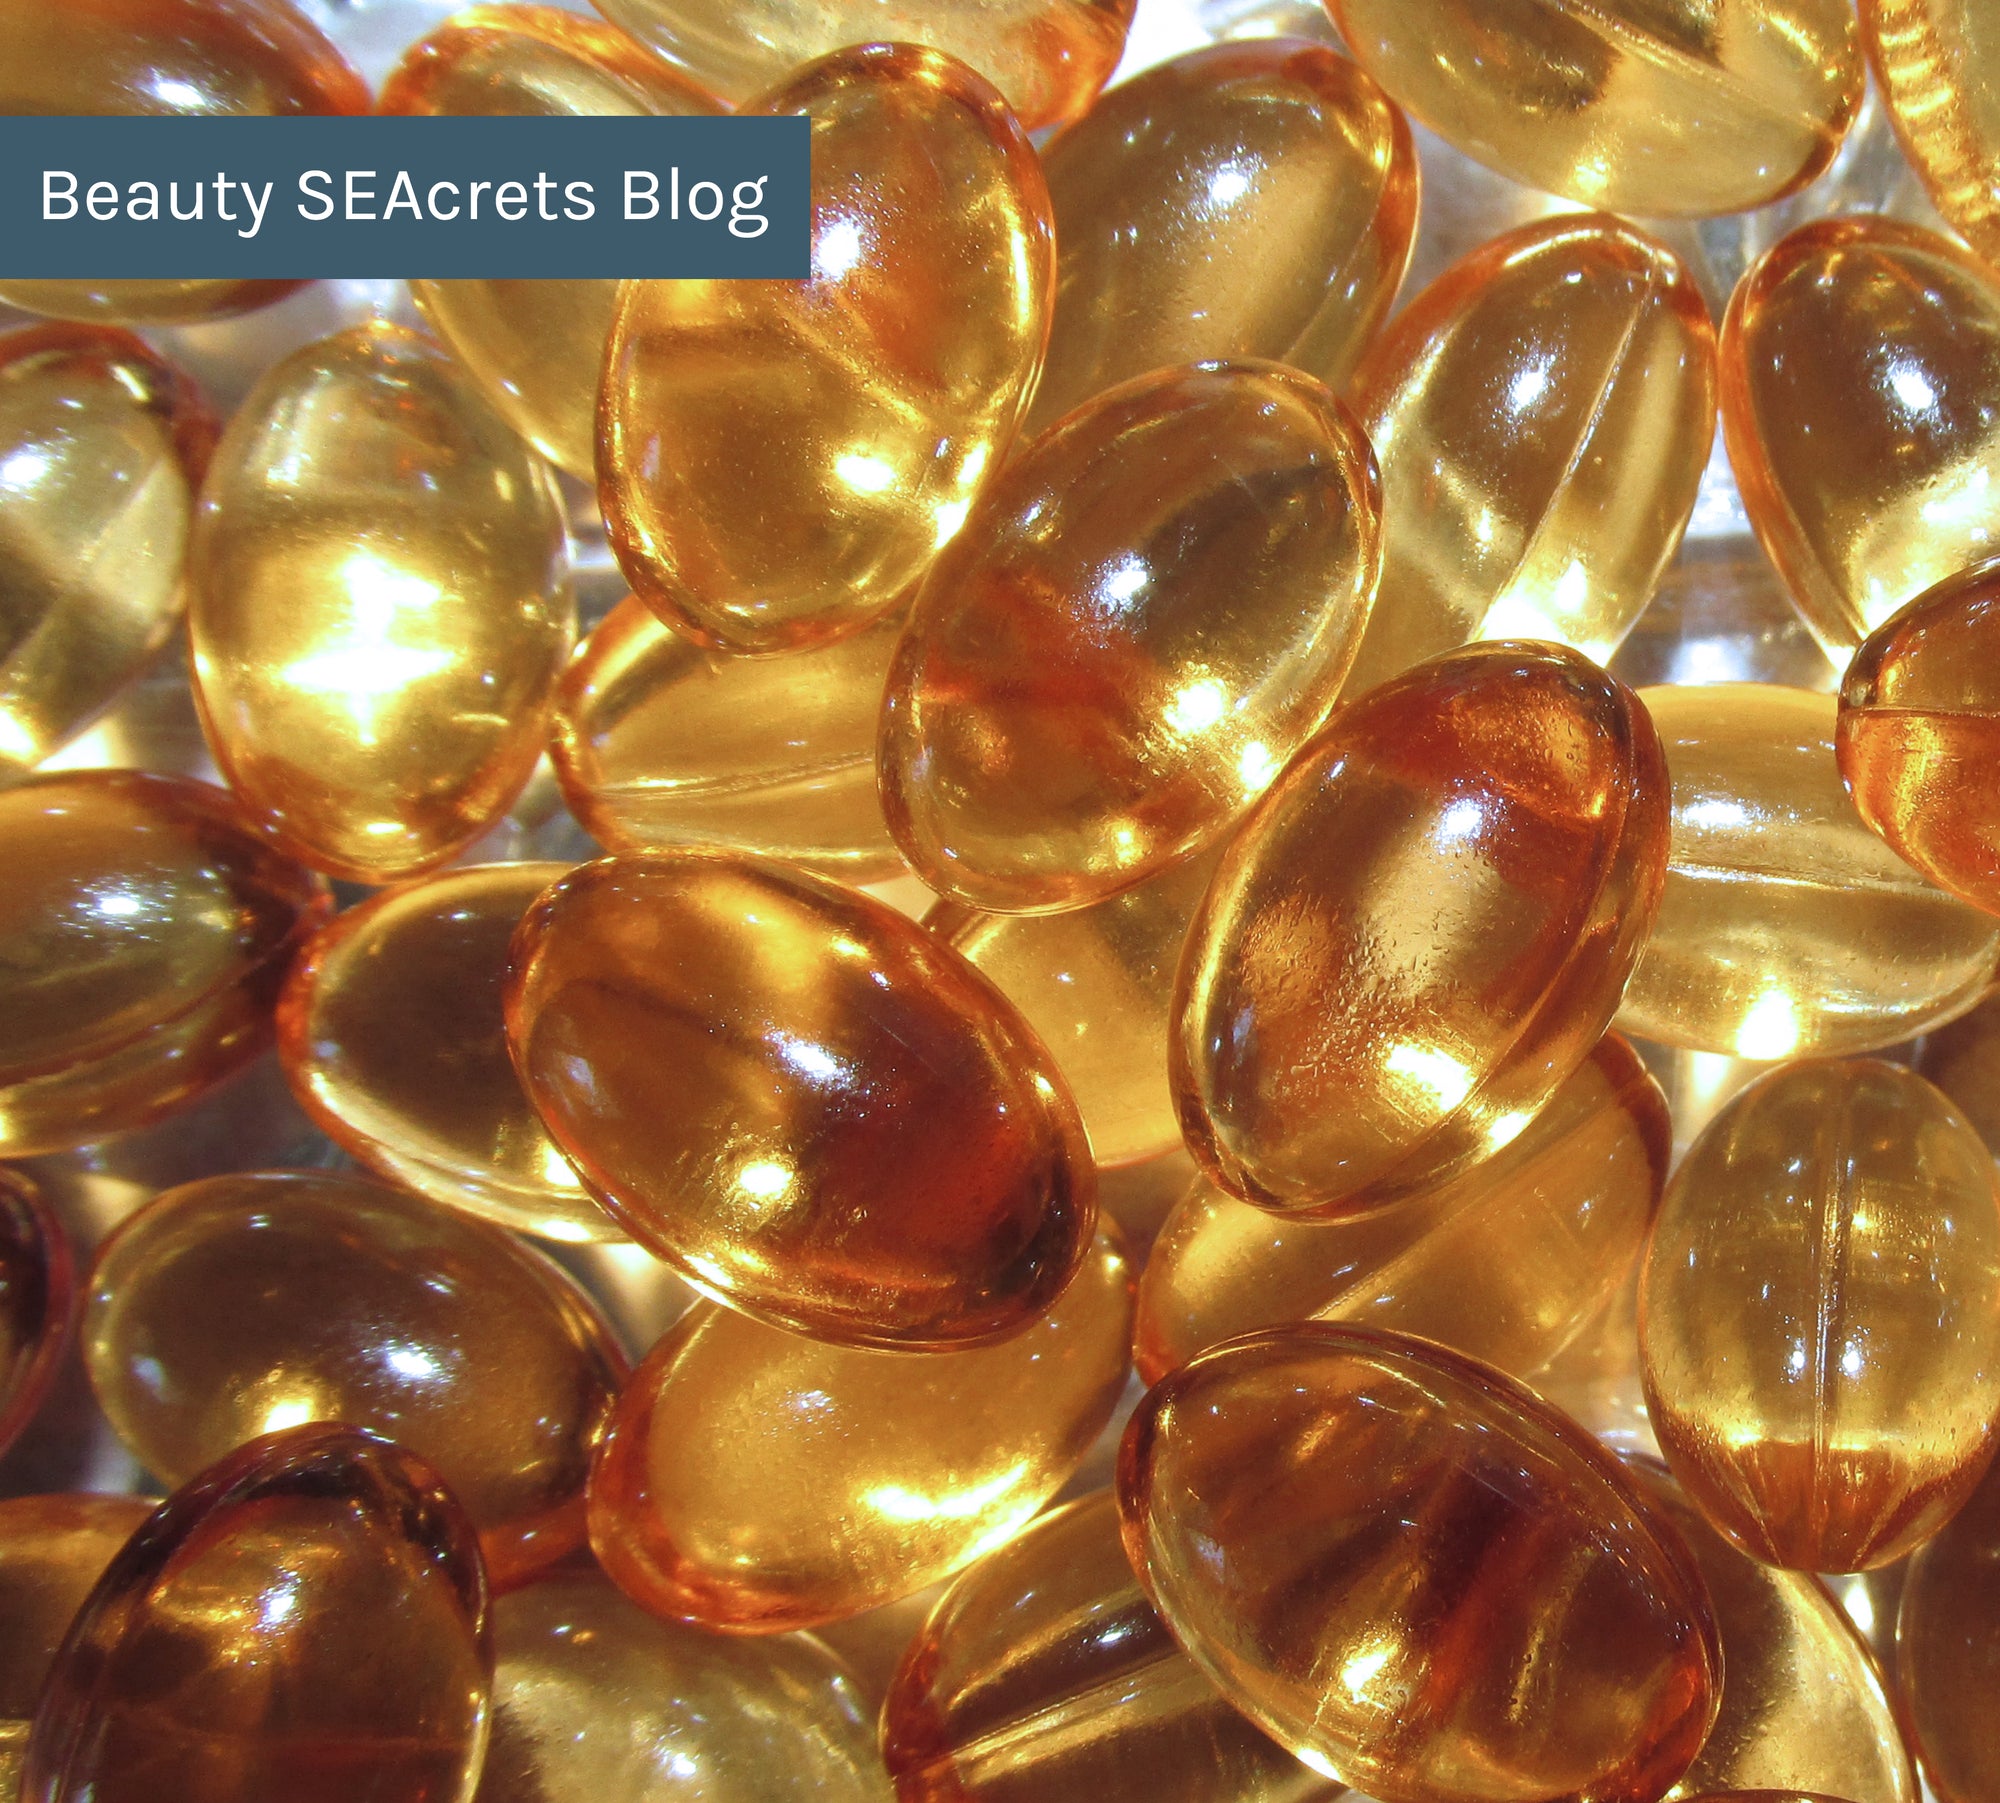 What Does Vitamin E Do for Your Skin?